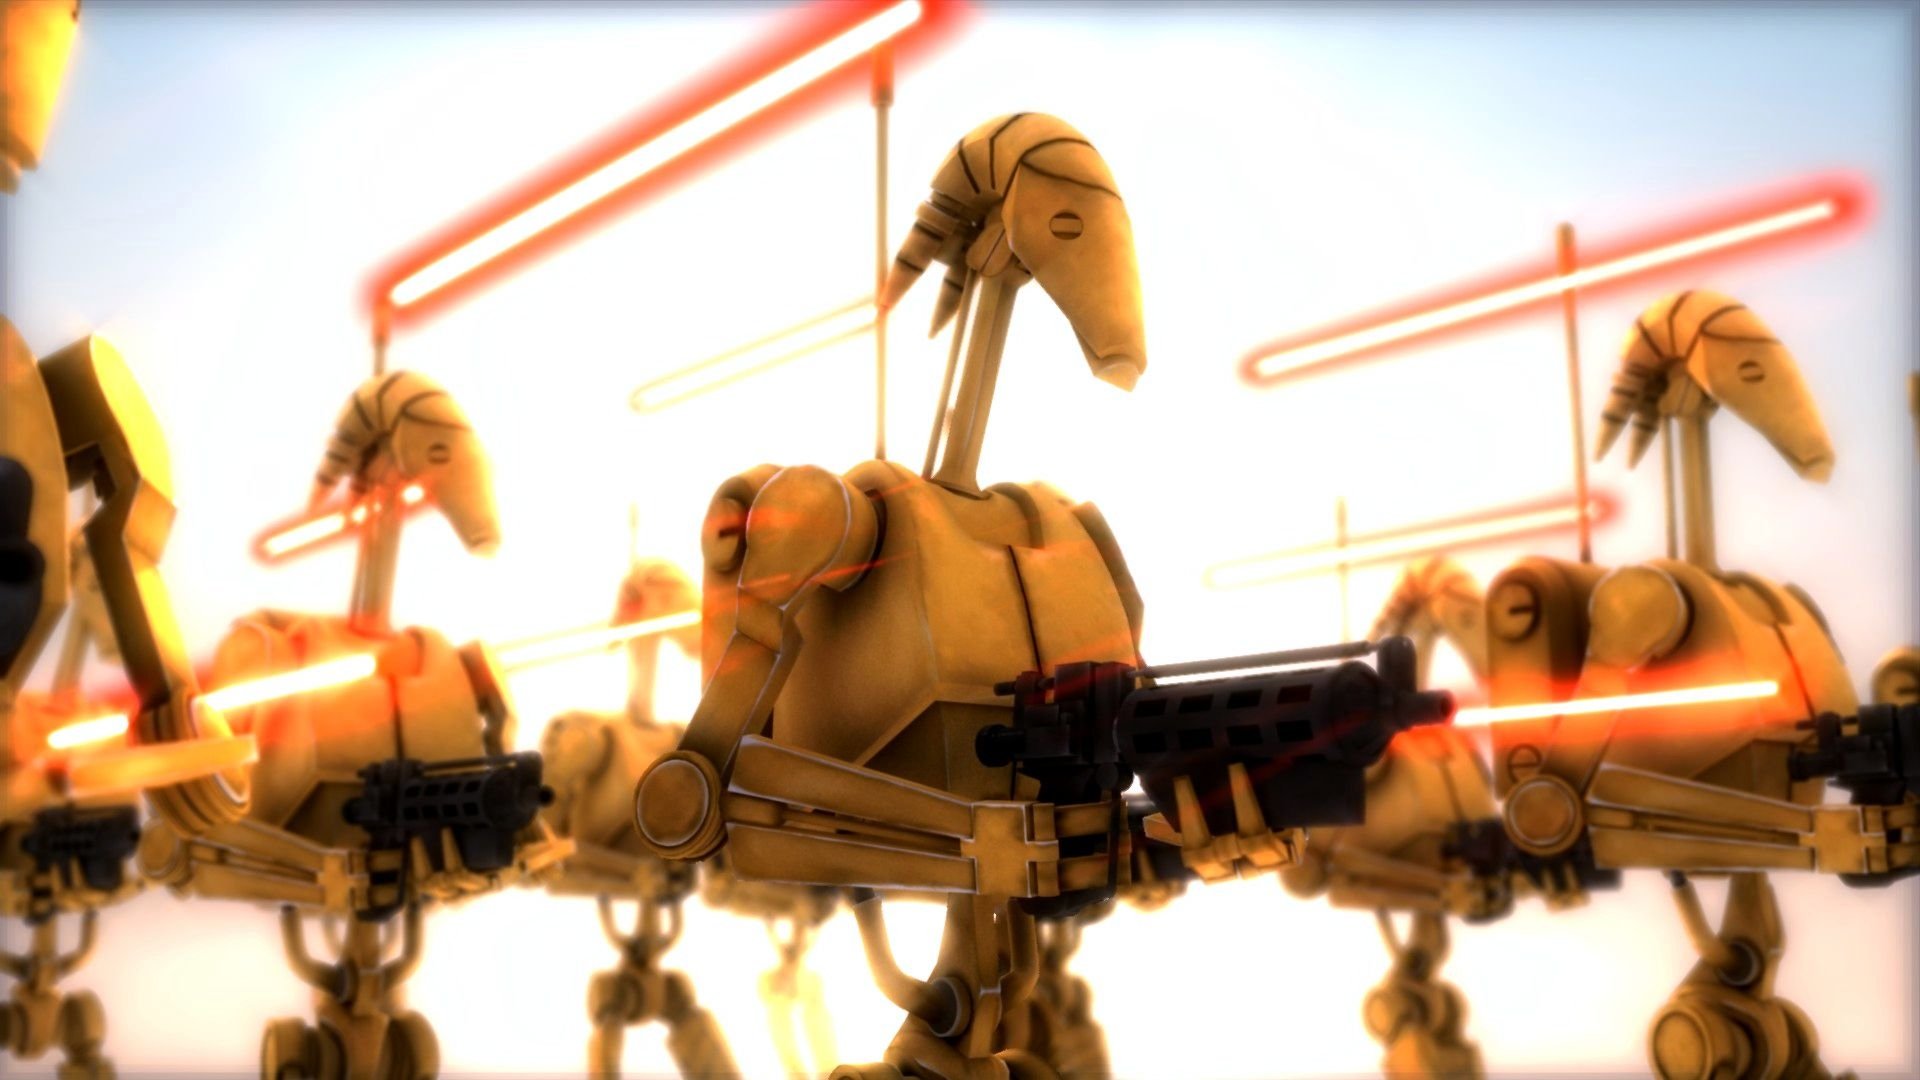 Battle Droid (Star Wars) HD Wallpaper and Background Image